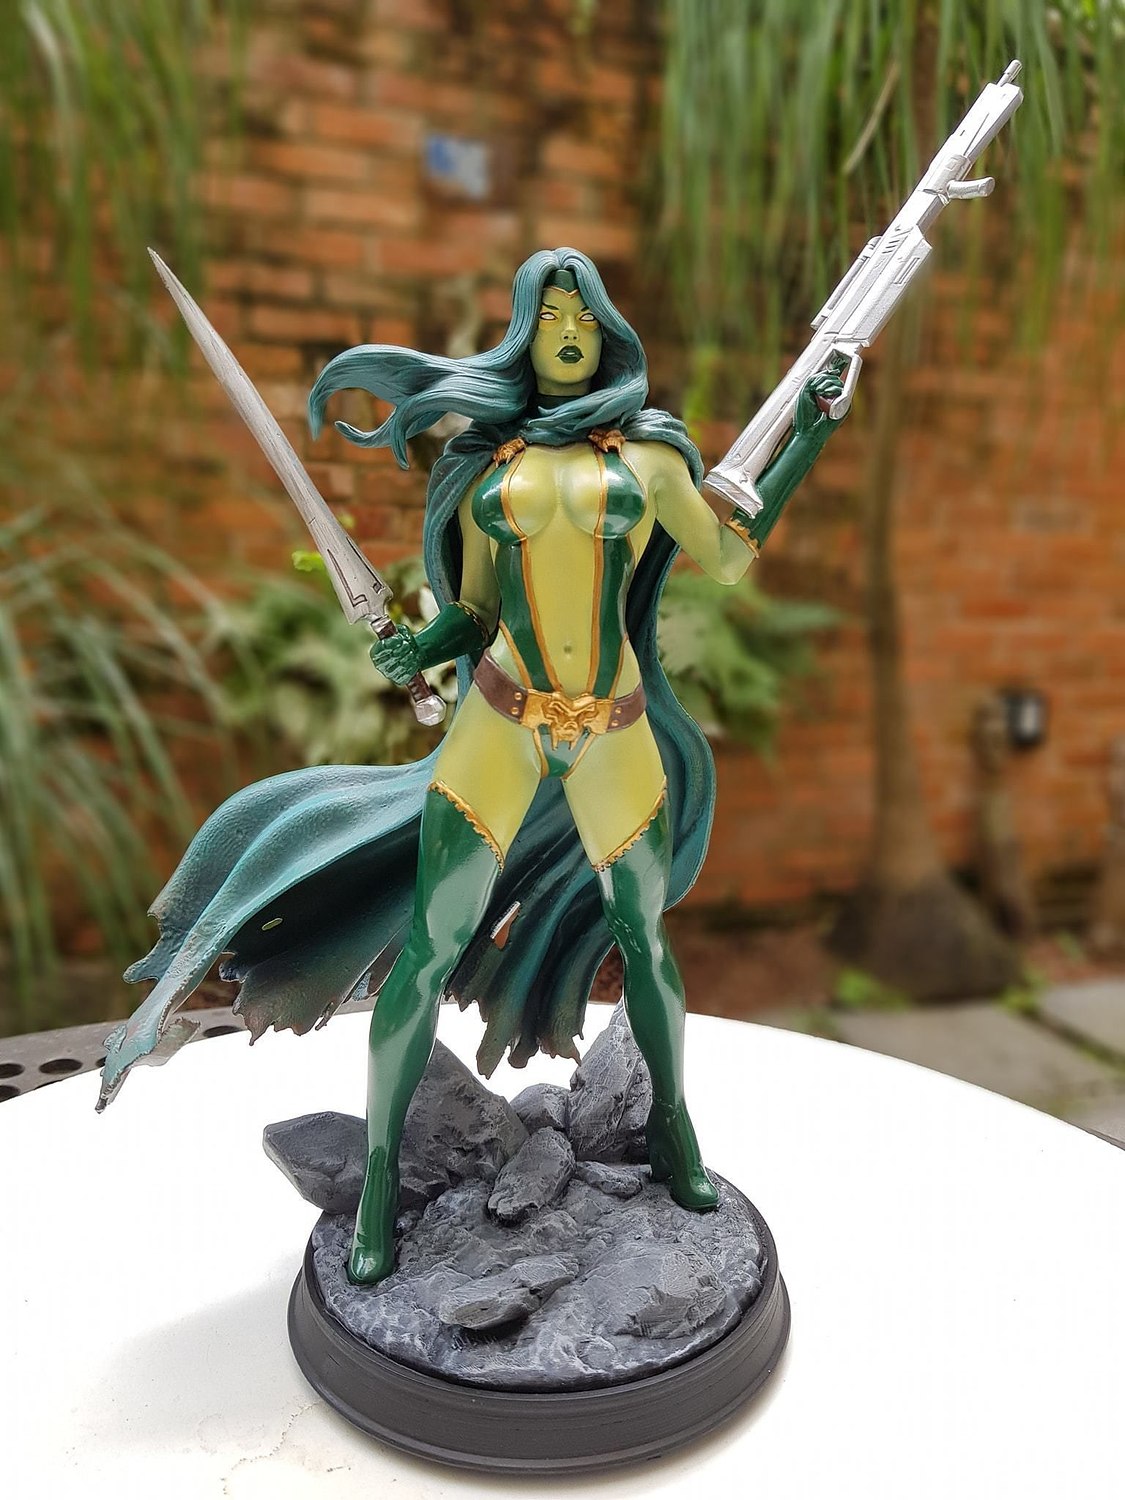 Gamora Classic from Guardian of the galaxy